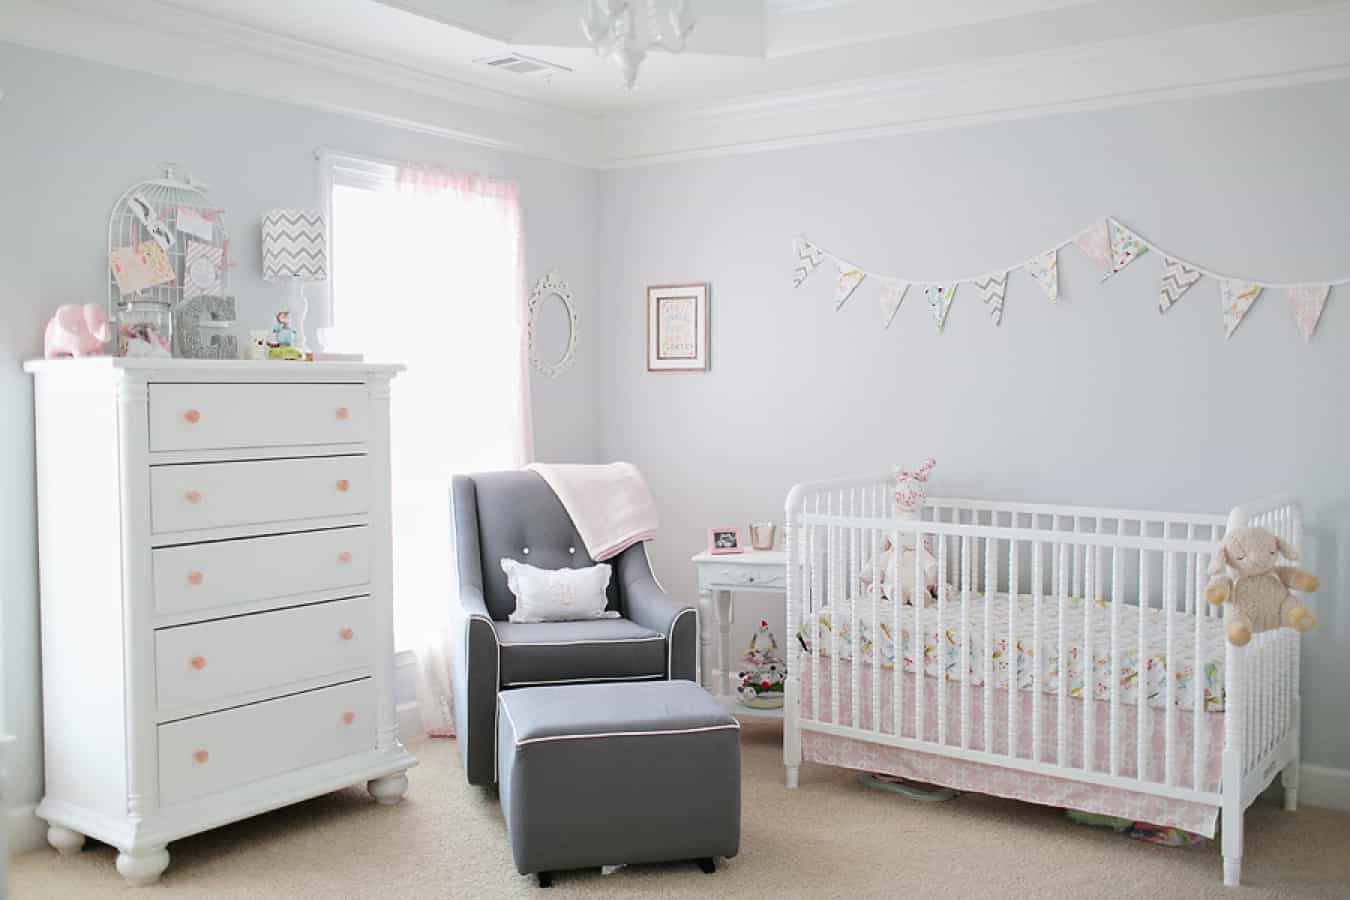 Sometimes less is more when it comes to nurseries.- Baby Boy Nursery Ideas | Baby Journey 